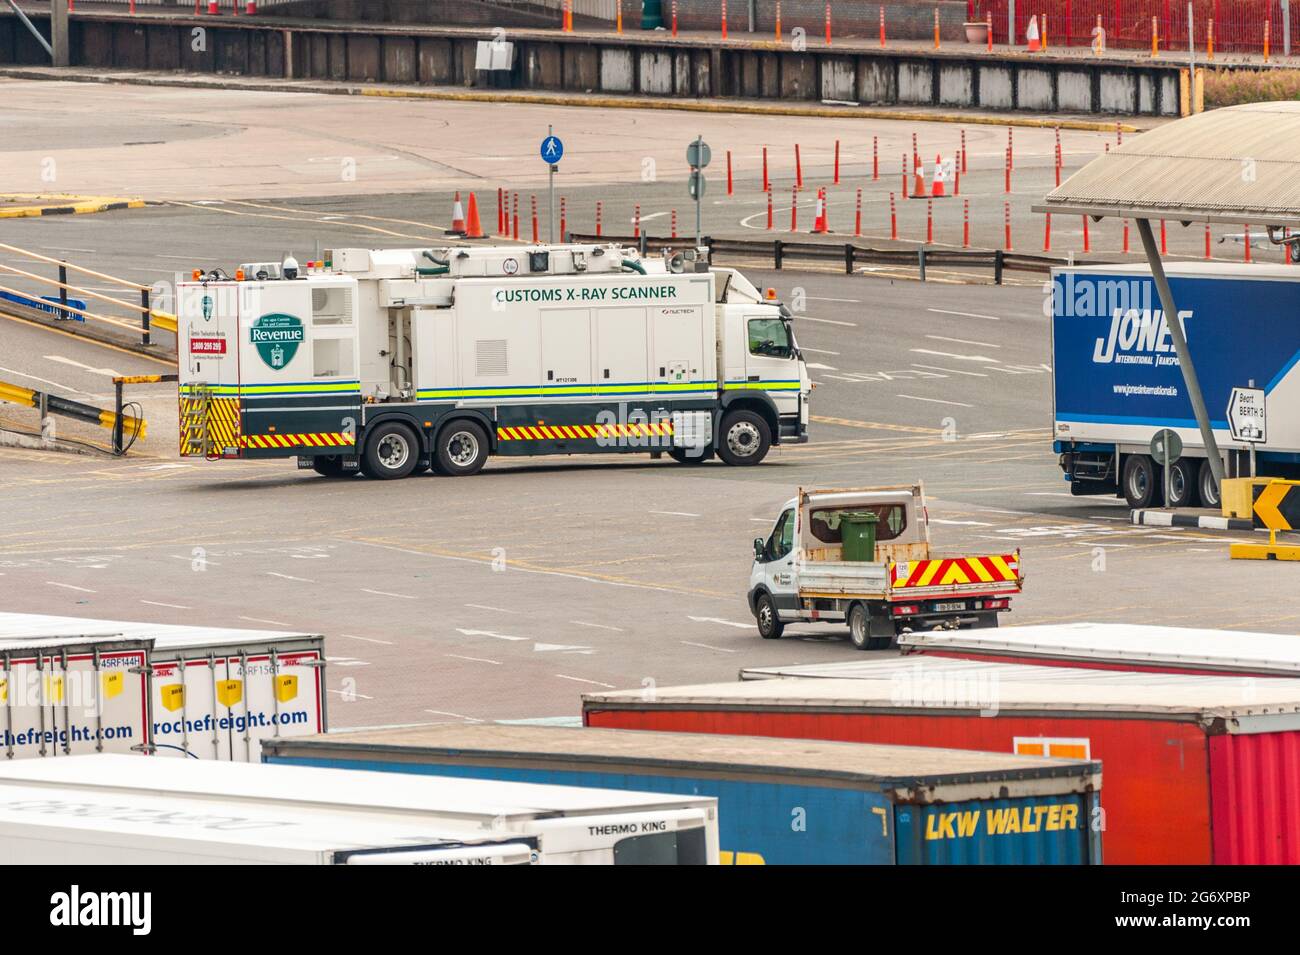 Rosslare, County Wexford, Ireland. 9th July, 2021. The Irish Revenue's Customs X-Ray Scanner at Rosslare Europort. The Irish Revenue has been physically checking 4% of freight arriving into Rosslare and Dublin ports since Brexit in January. Credit: AG News/Alamy Live News Stock Photo